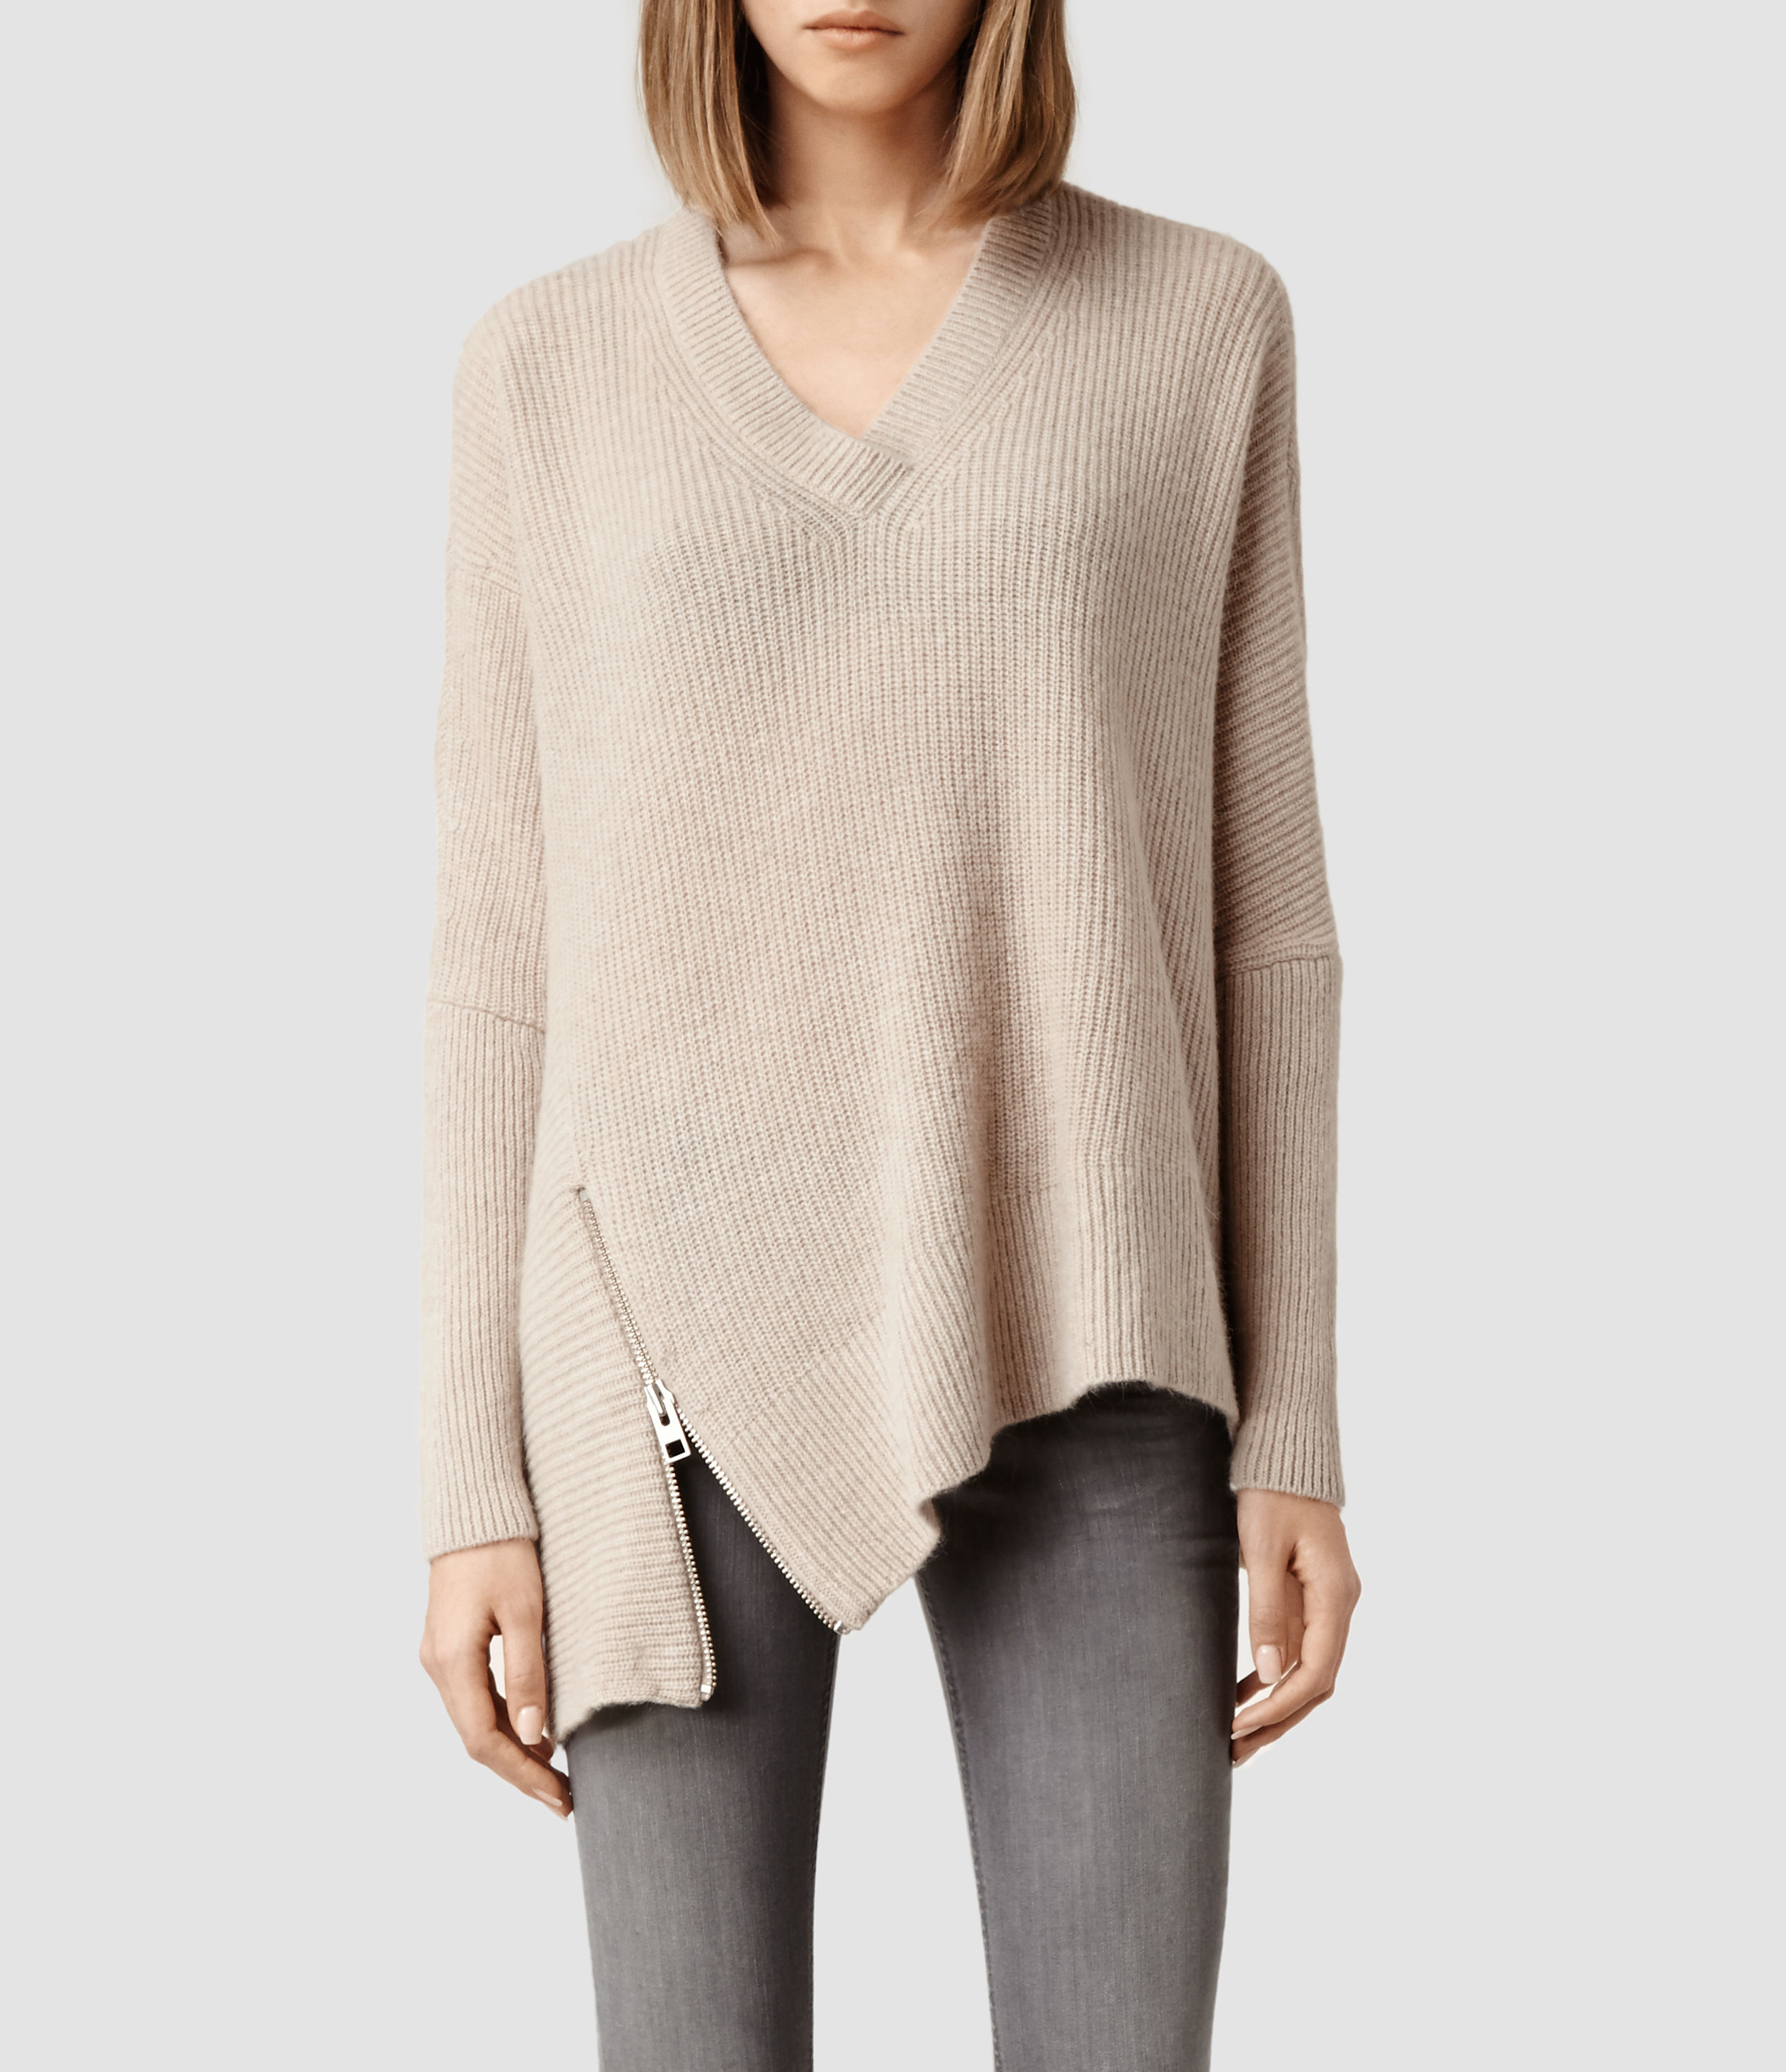 AllSaints Able Zip Sweater in Natural - Lyst